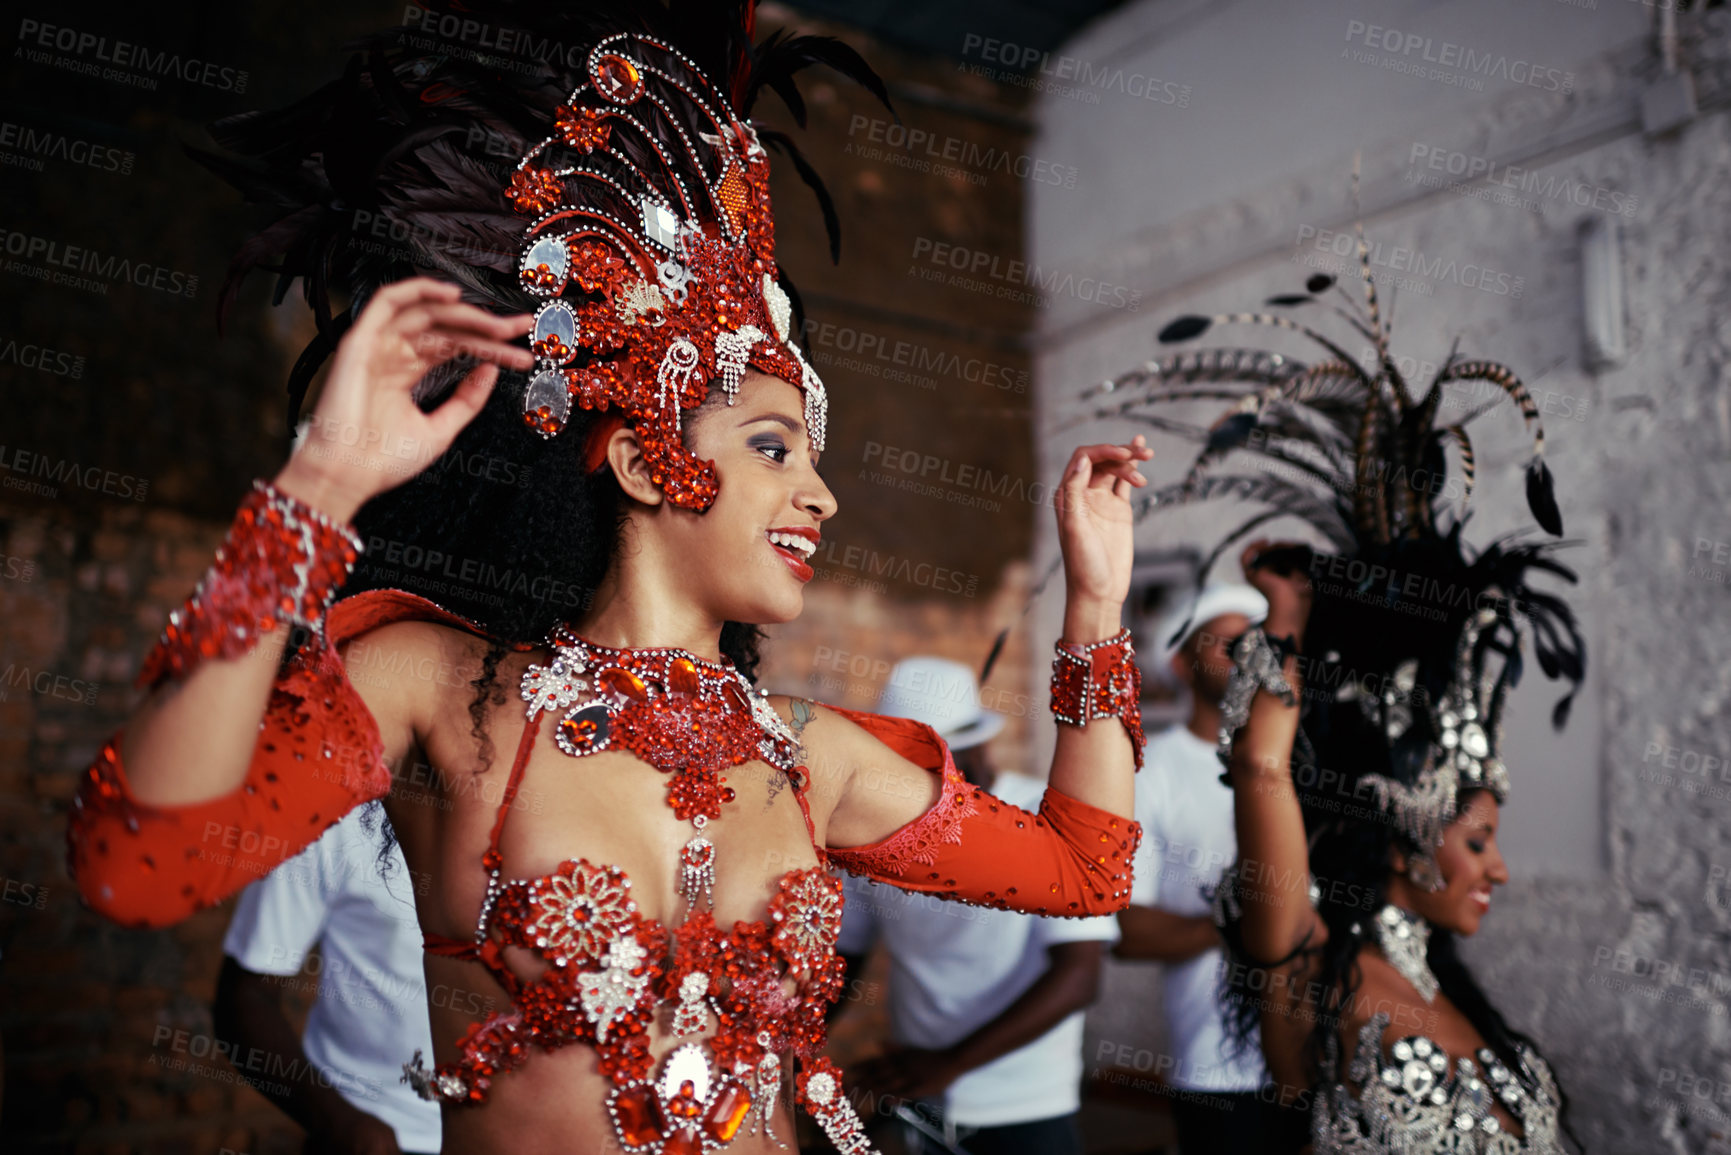 Buy stock photo Smile, dance and women at carnival in costume for celebration, music culture and happy band in Brazil. Samba, party and girl friends together at festival, parade or stage show in Rio de Janeiro.